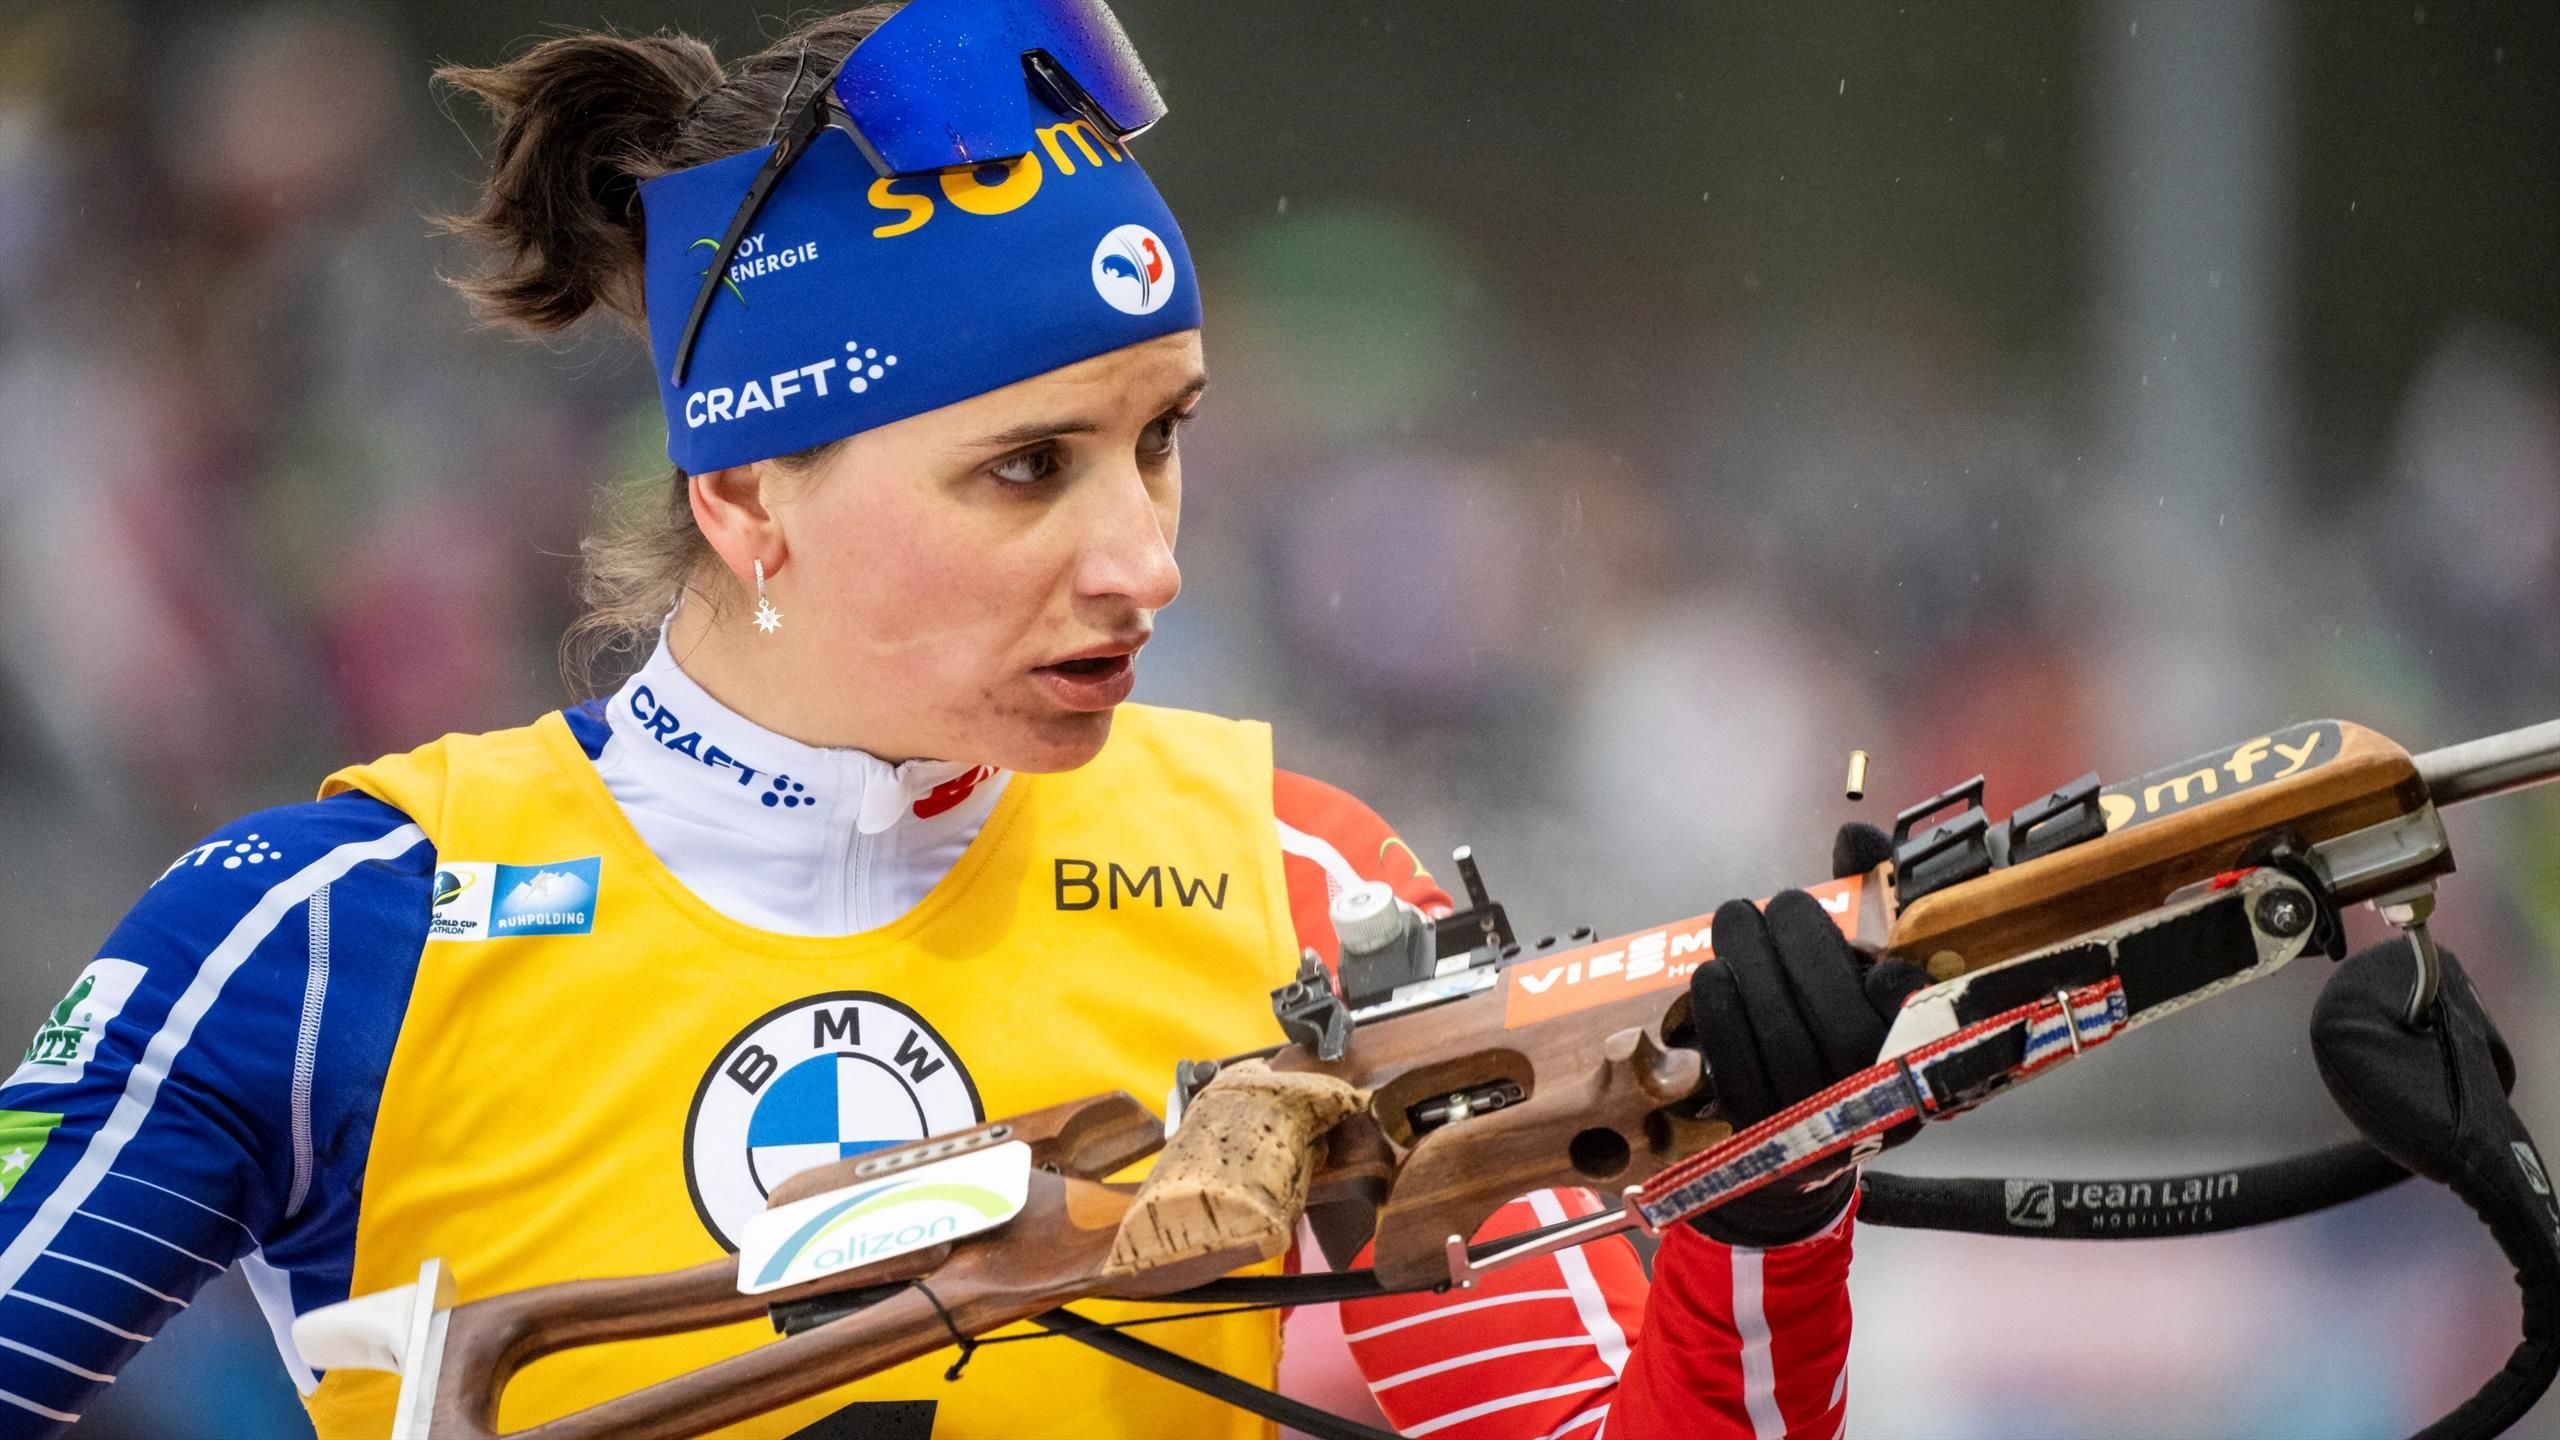 It’s not an ideal start to the season: the athlete who won the combined World Cup is accused of fraud